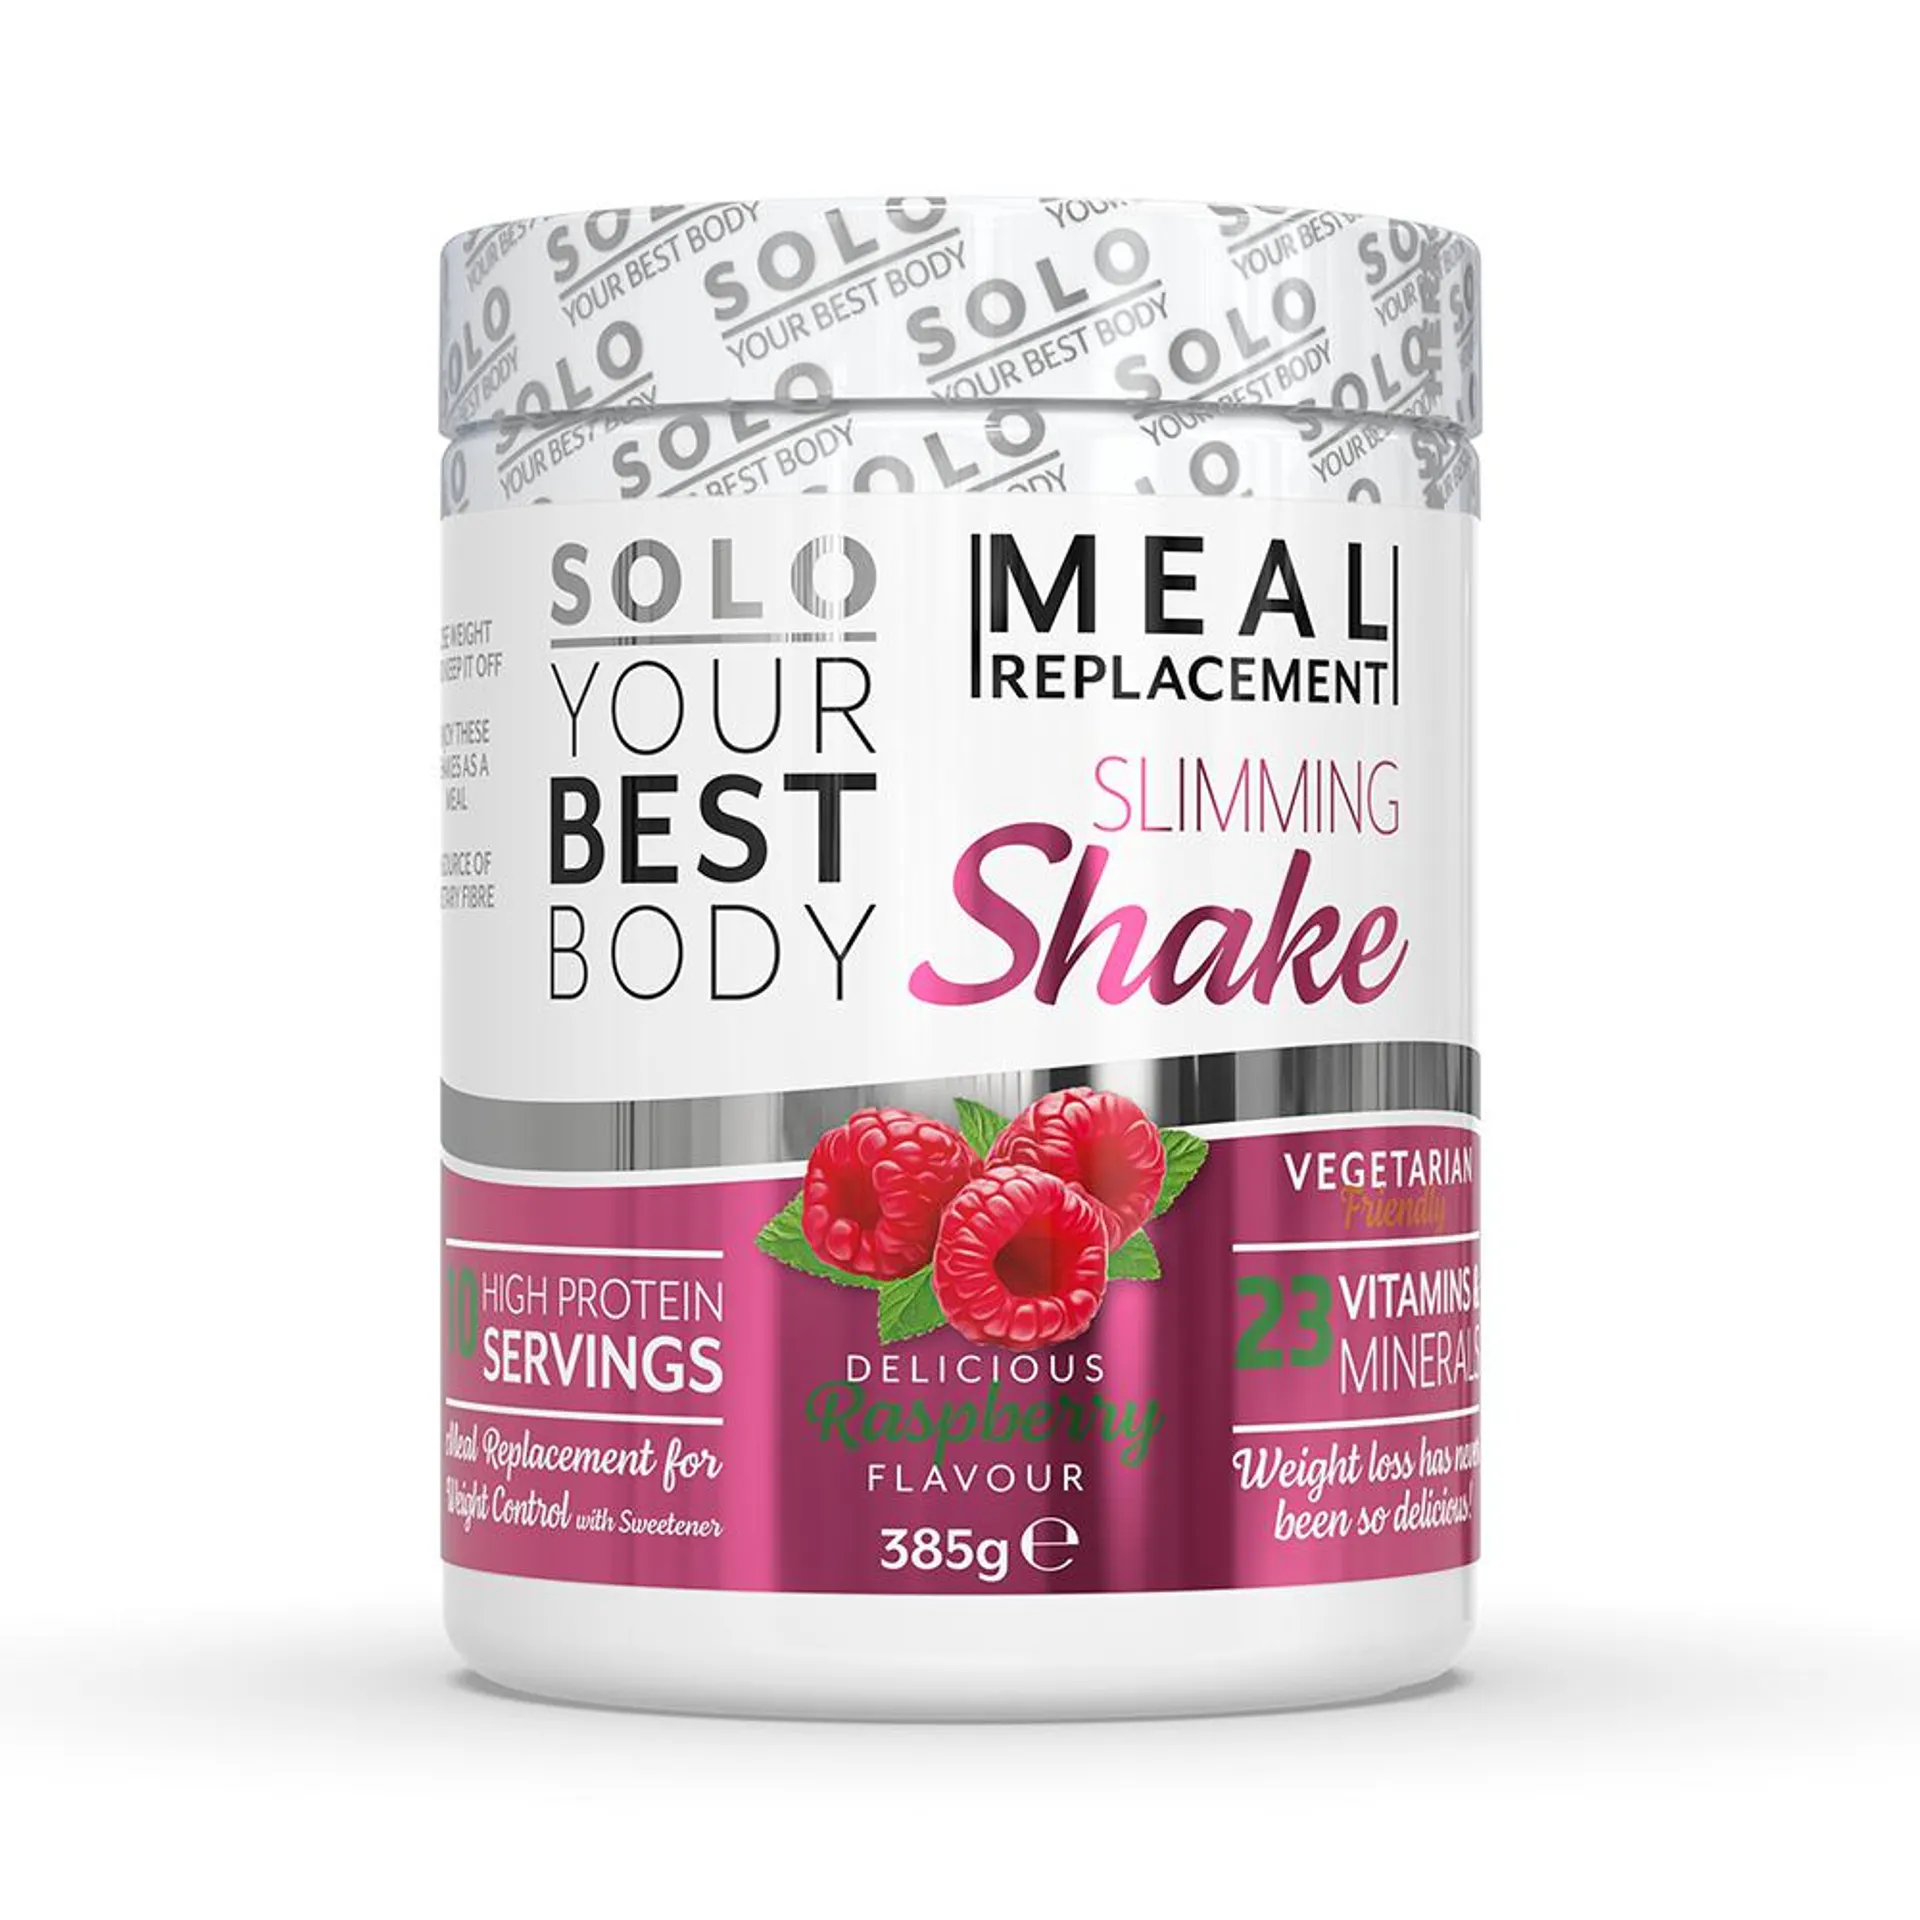 Solo Meal Replacement Slimming Shake 385g - Raspberry